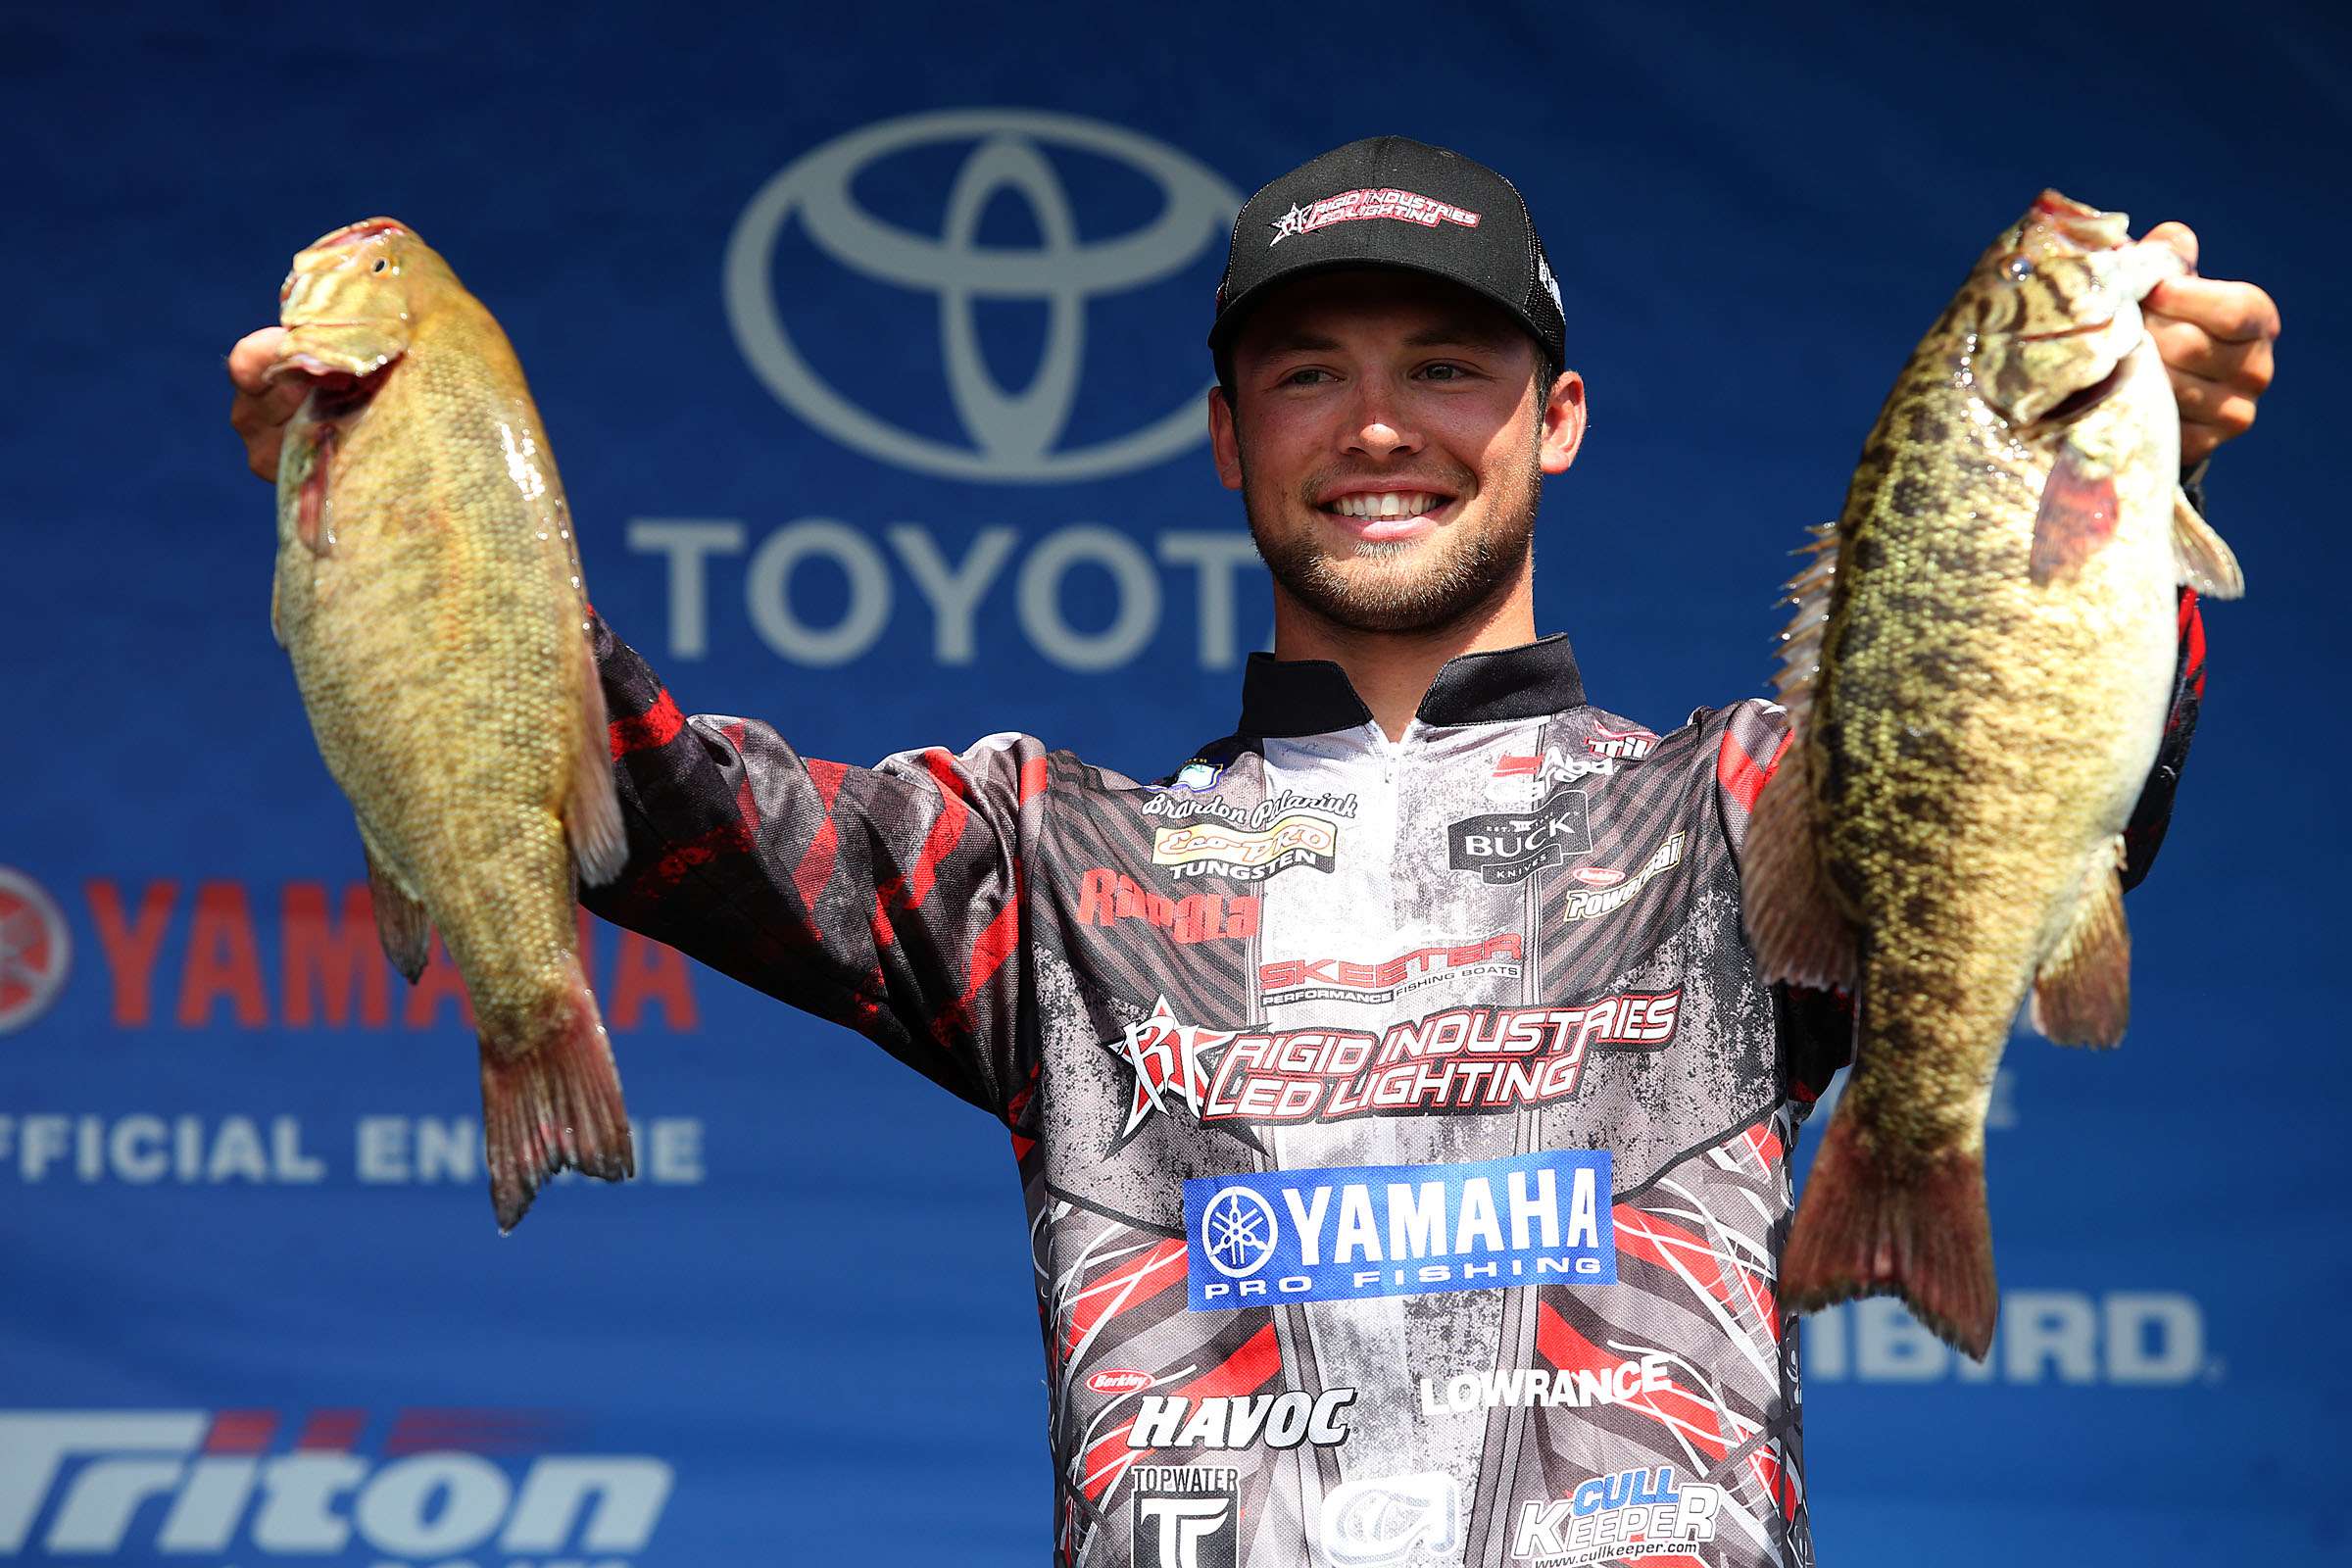 In 2013, Brandon Palaniuk was coming off a disqualification that quite possibly cost him victory on the Mississippi River out of La Crosse, Wis. After explaining his accidental cull just yards on the wrong side of the state line, Palaniuk said heâd just have to go out and win the next one.